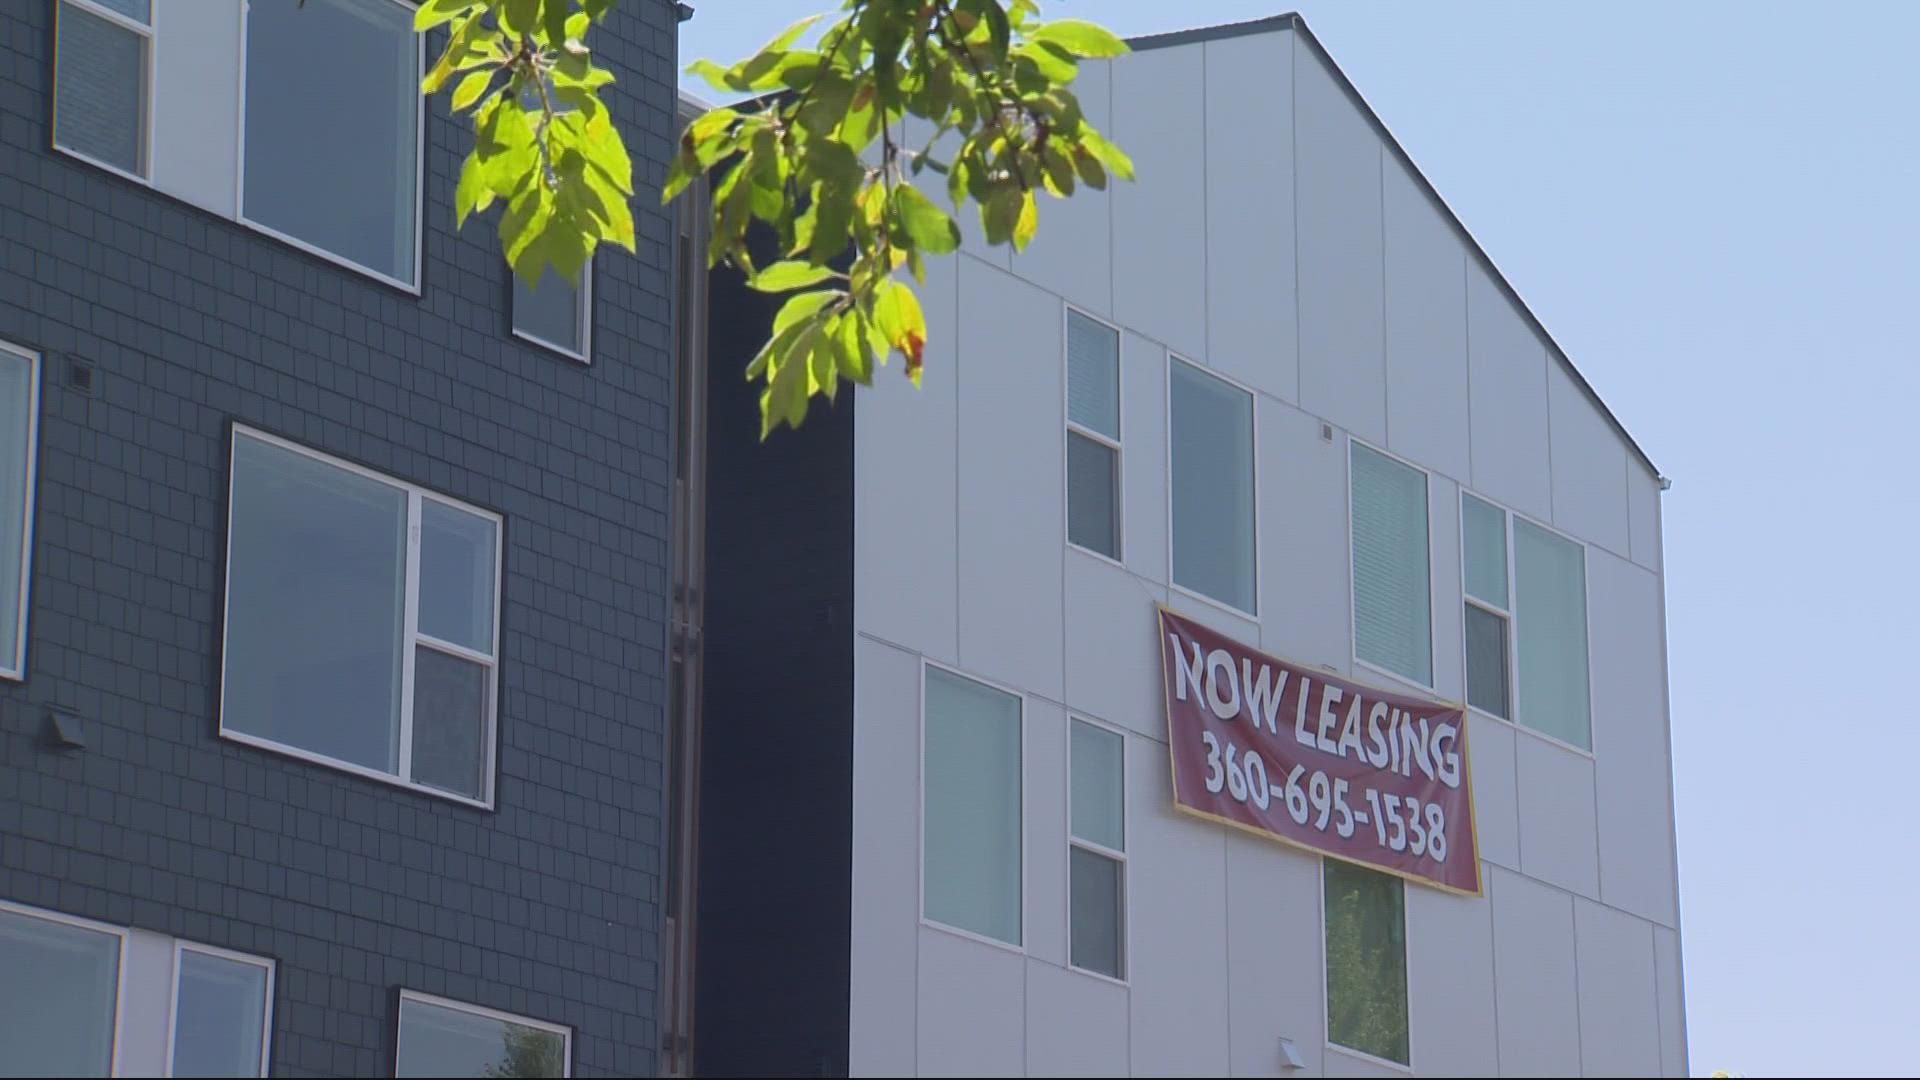 The apartments are operated by the Vancouver Housing Authority, offering affordable housing to seniors on the brink of homelessness.